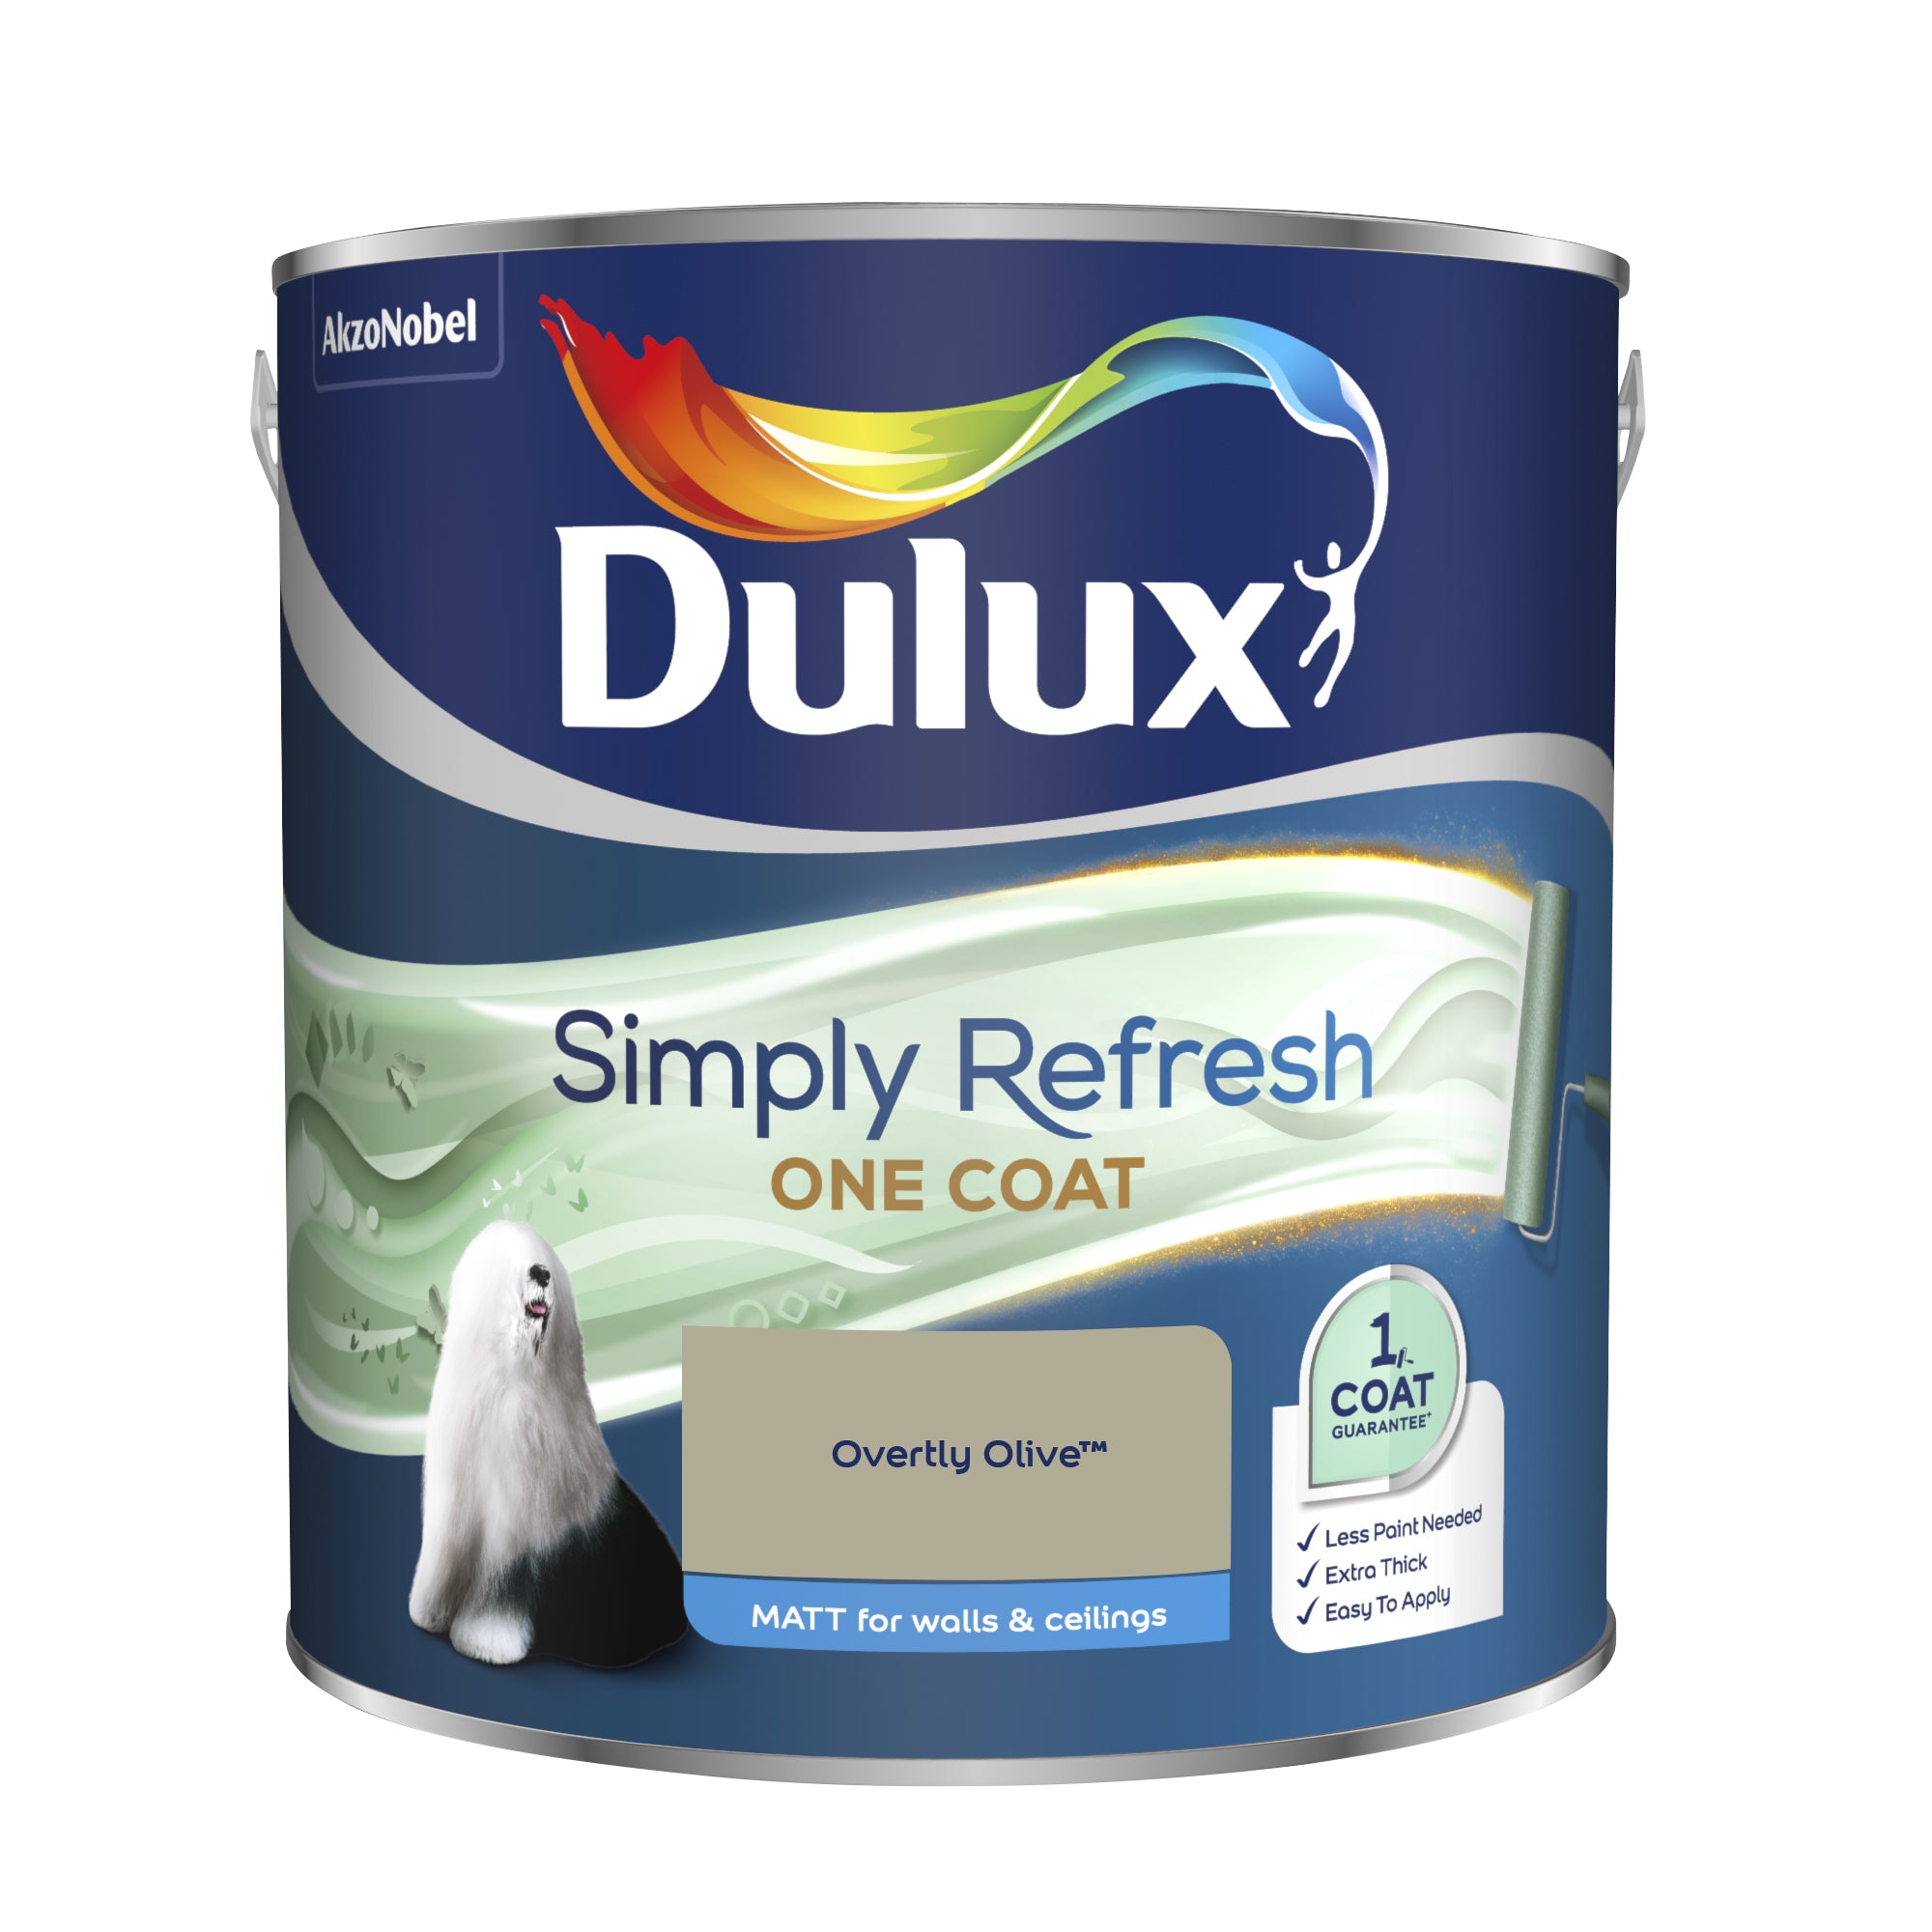 Dulux Simply Refresh One Coat Matt Overtly Olive 2.5L